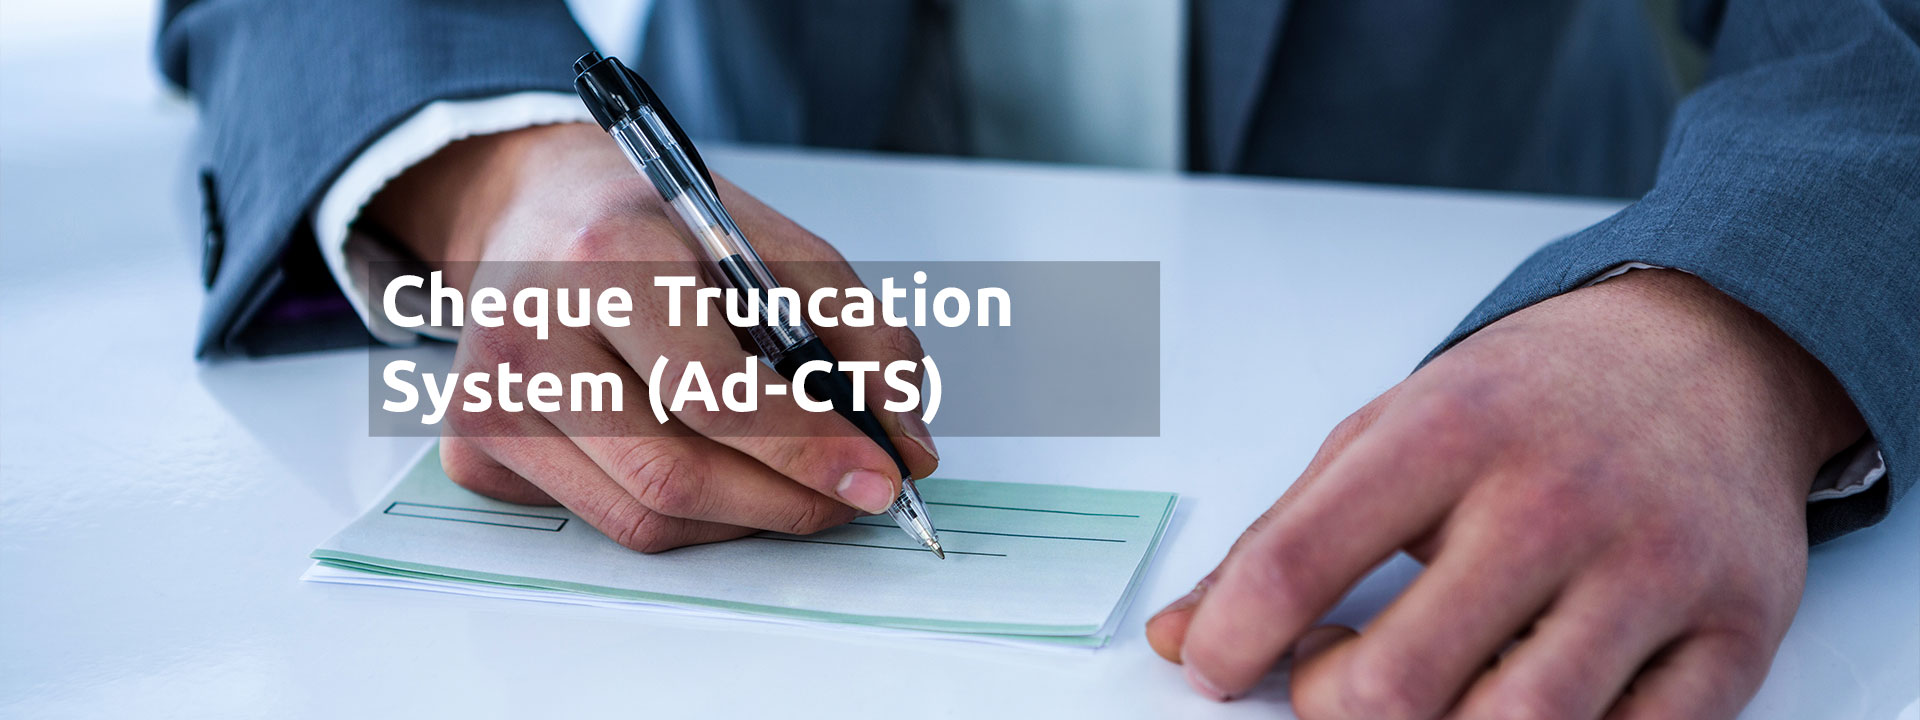 Ad-CTS (Cheque Truncation System)